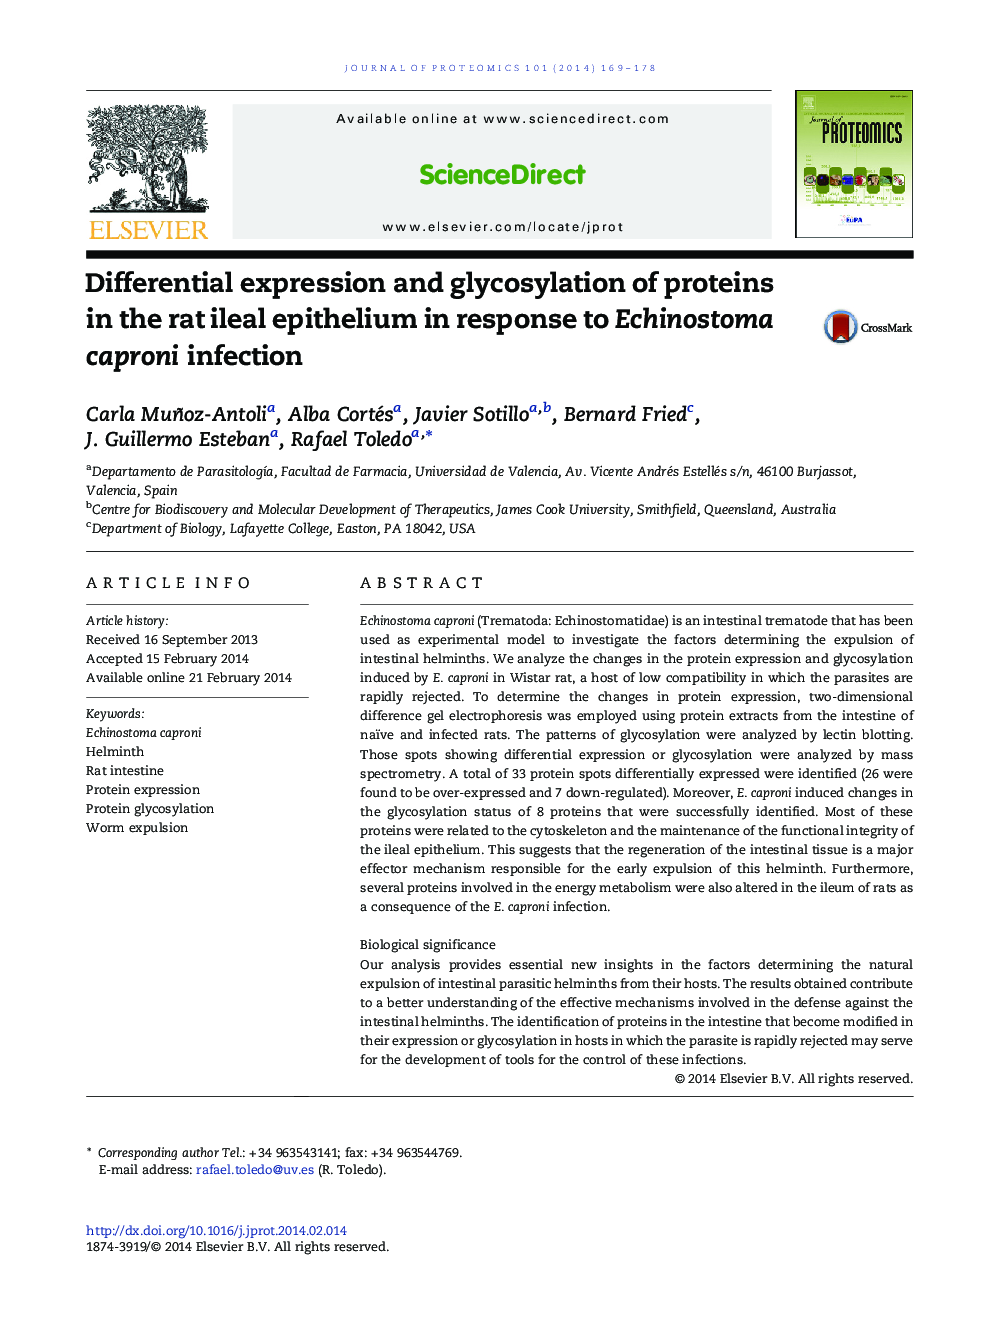 Differential expression and glycosylation of proteins in the rat ileal epithelium in response to Echinostoma caproni infection